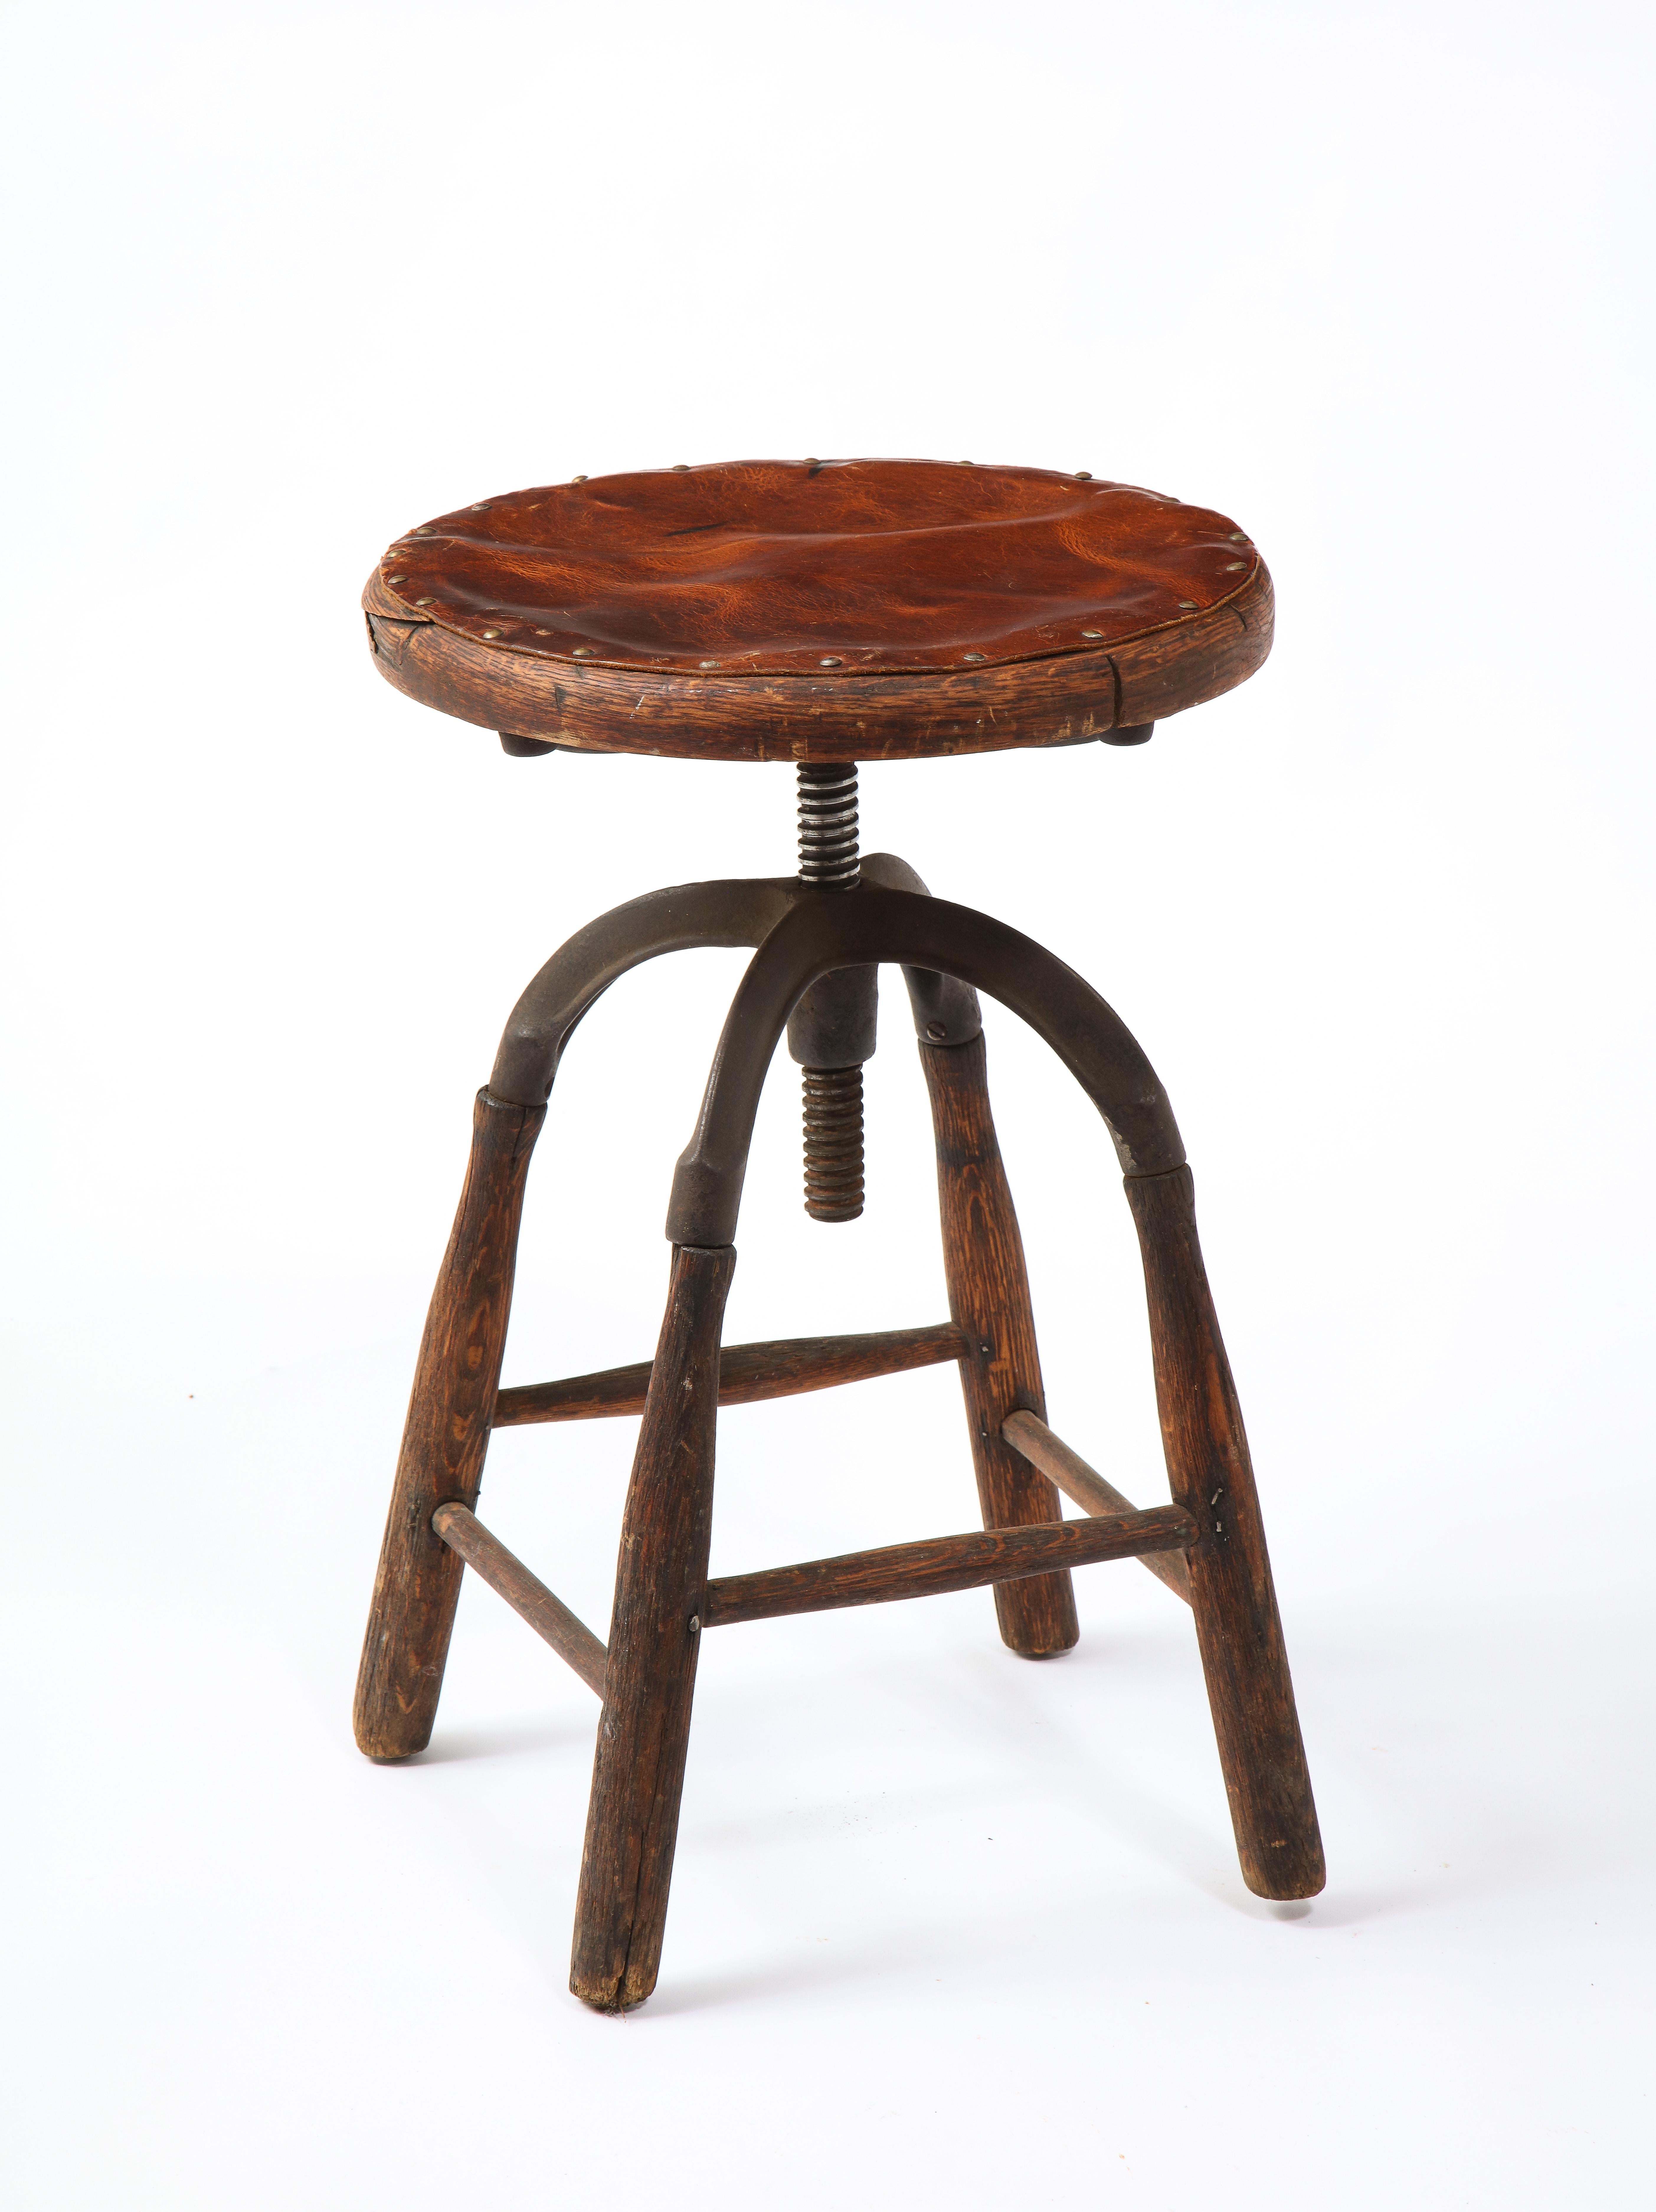 Early Industrial Work Stool, USA, 1940's For Sale 7